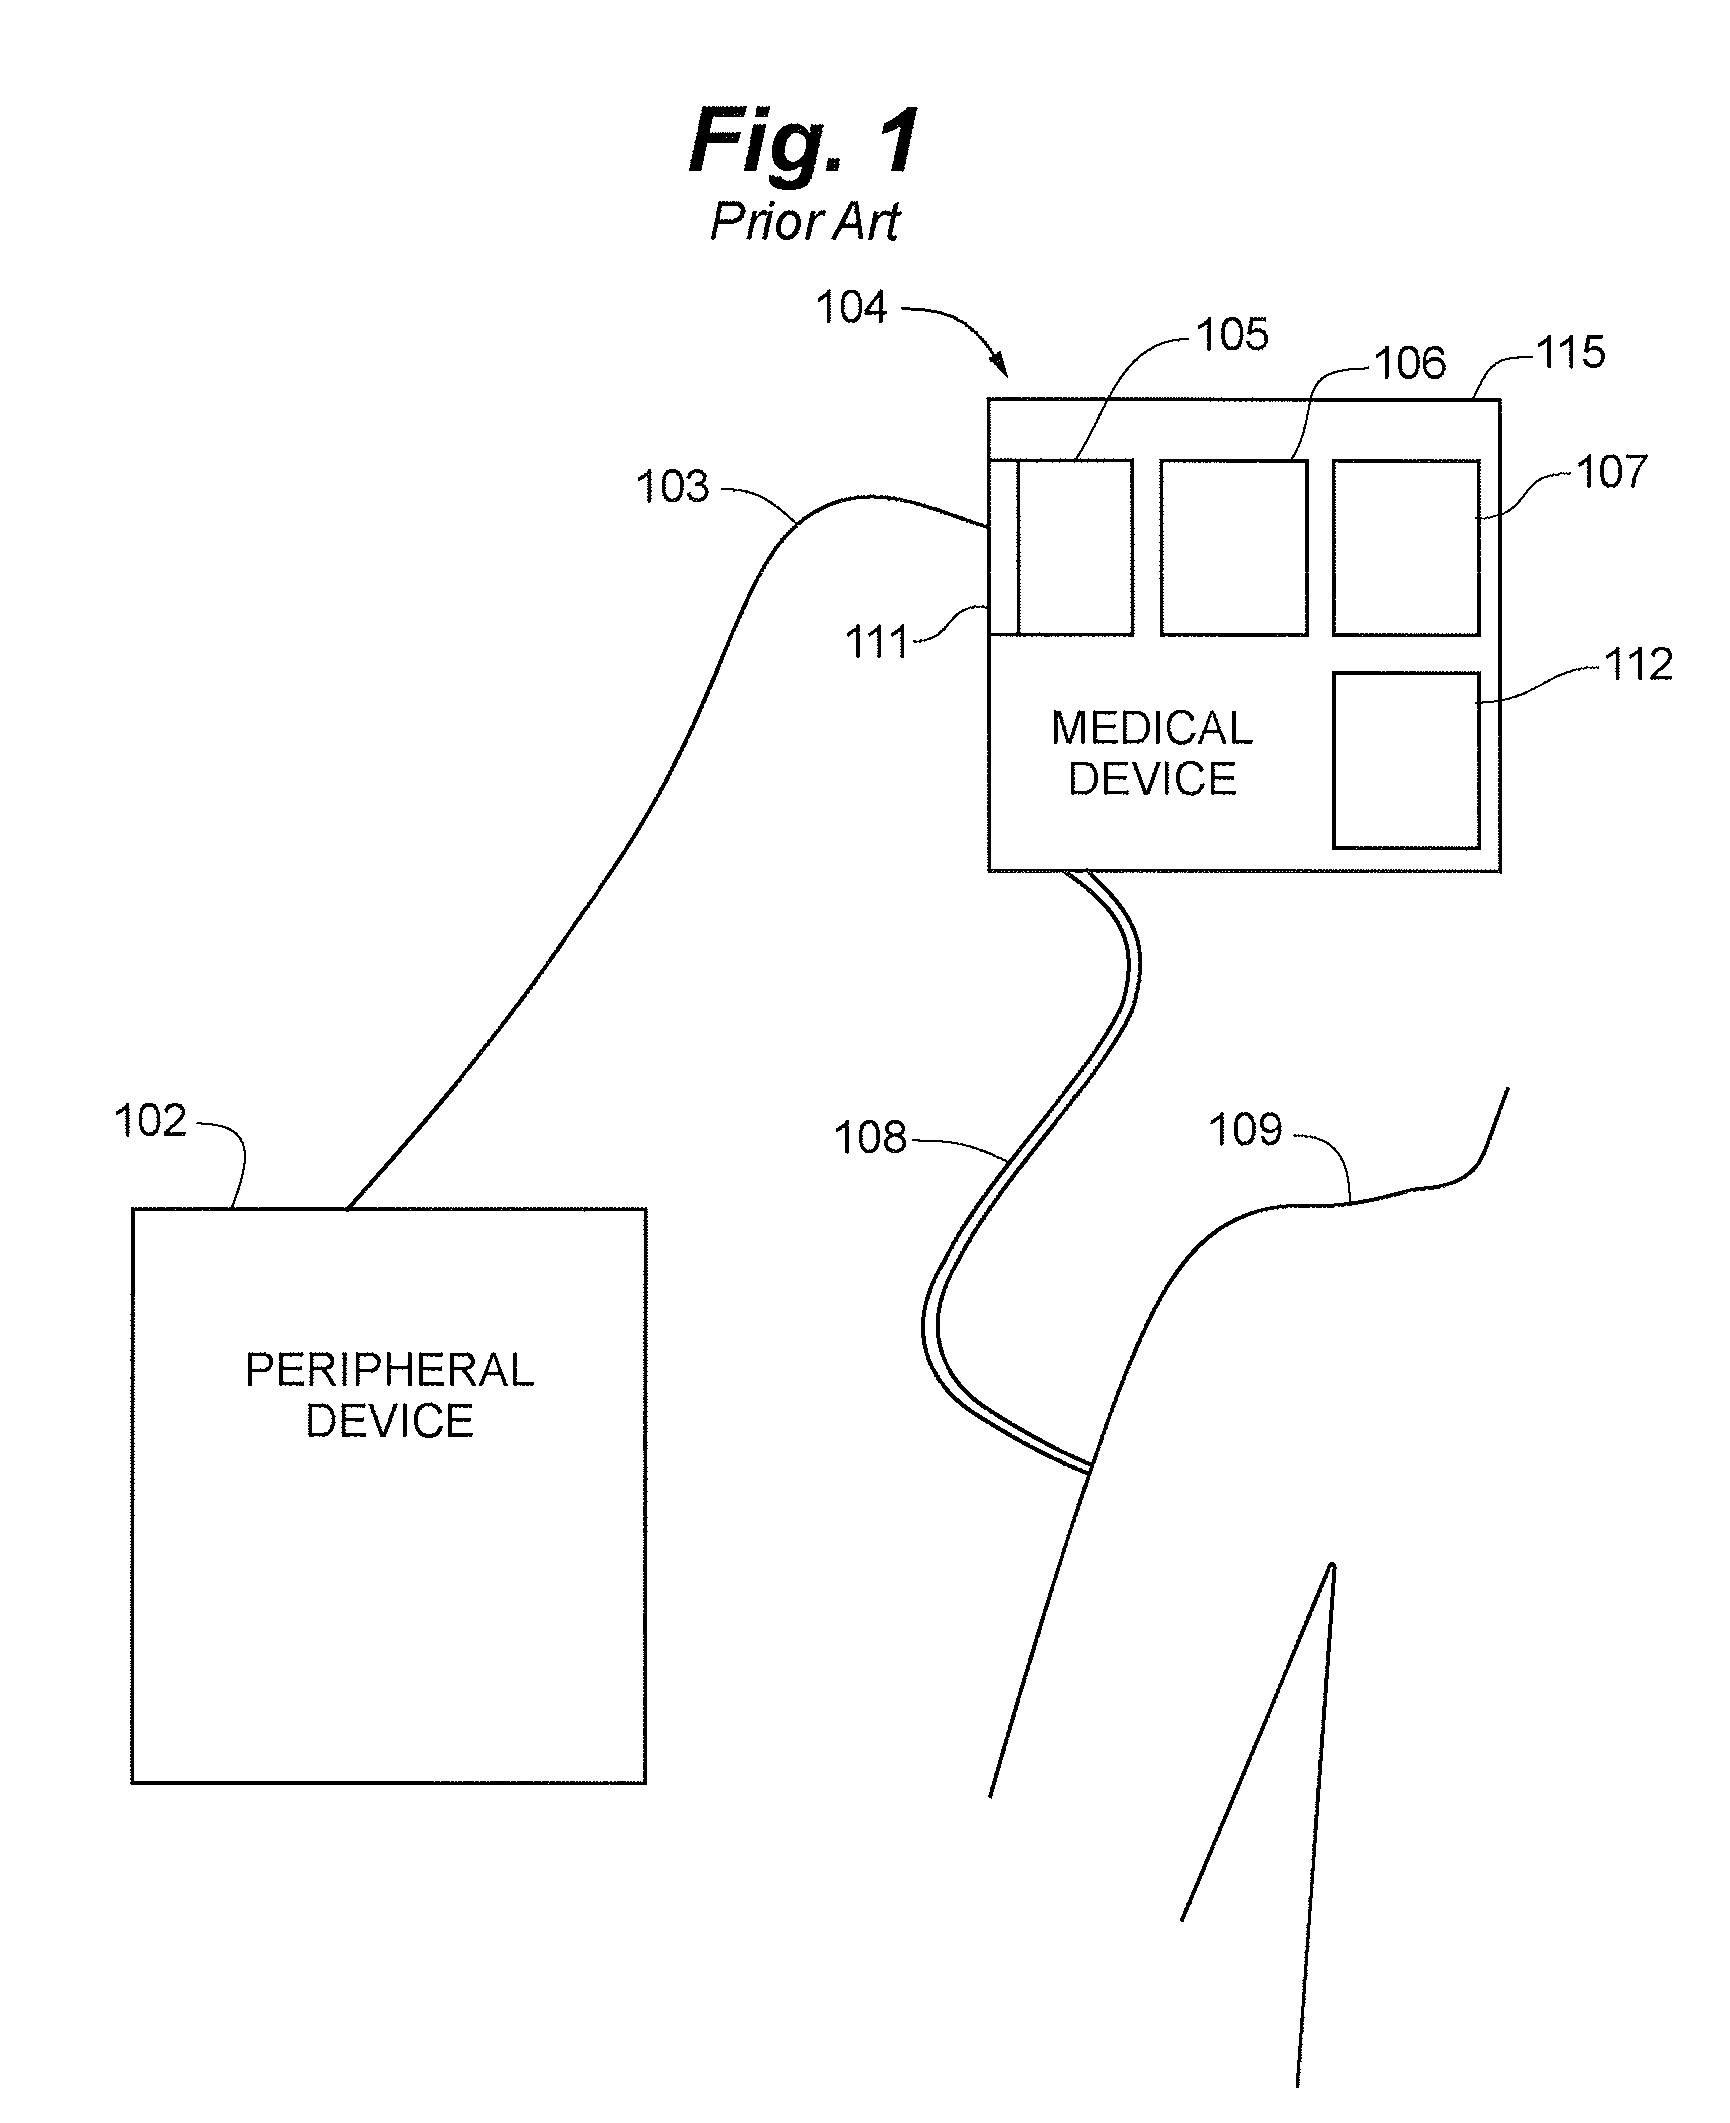 Ambulatory medical device with electrical isolation from connected peripheral device